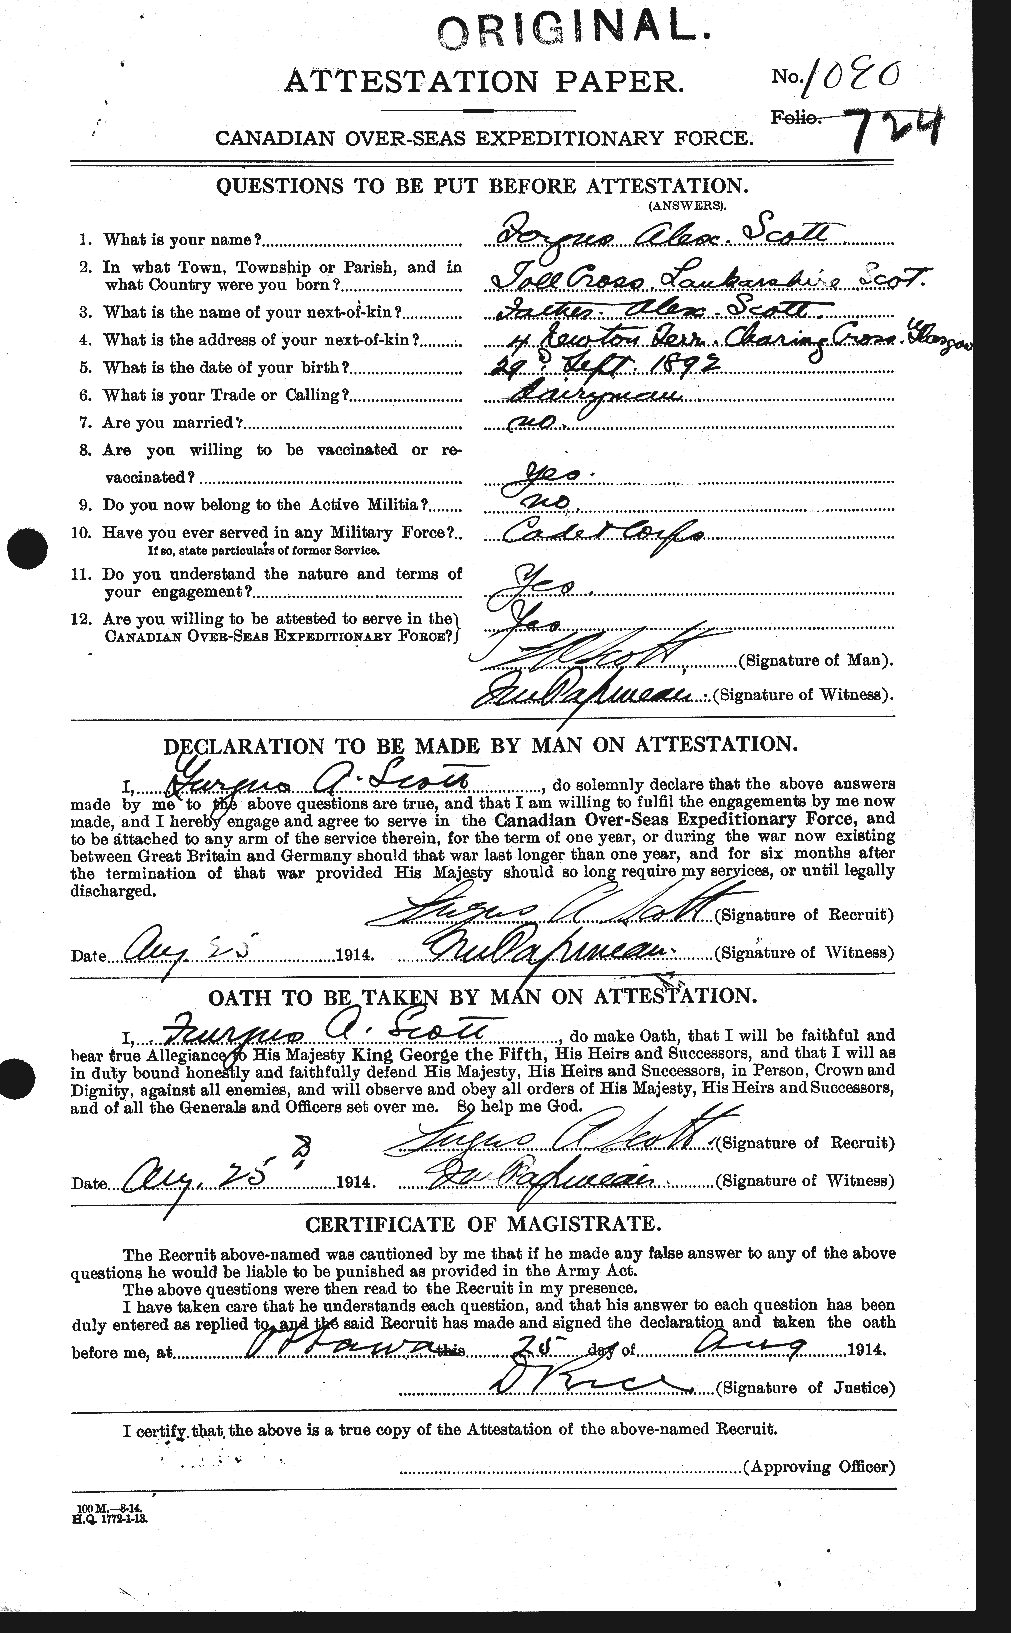 Personnel Records of the First World War - CEF 084998a